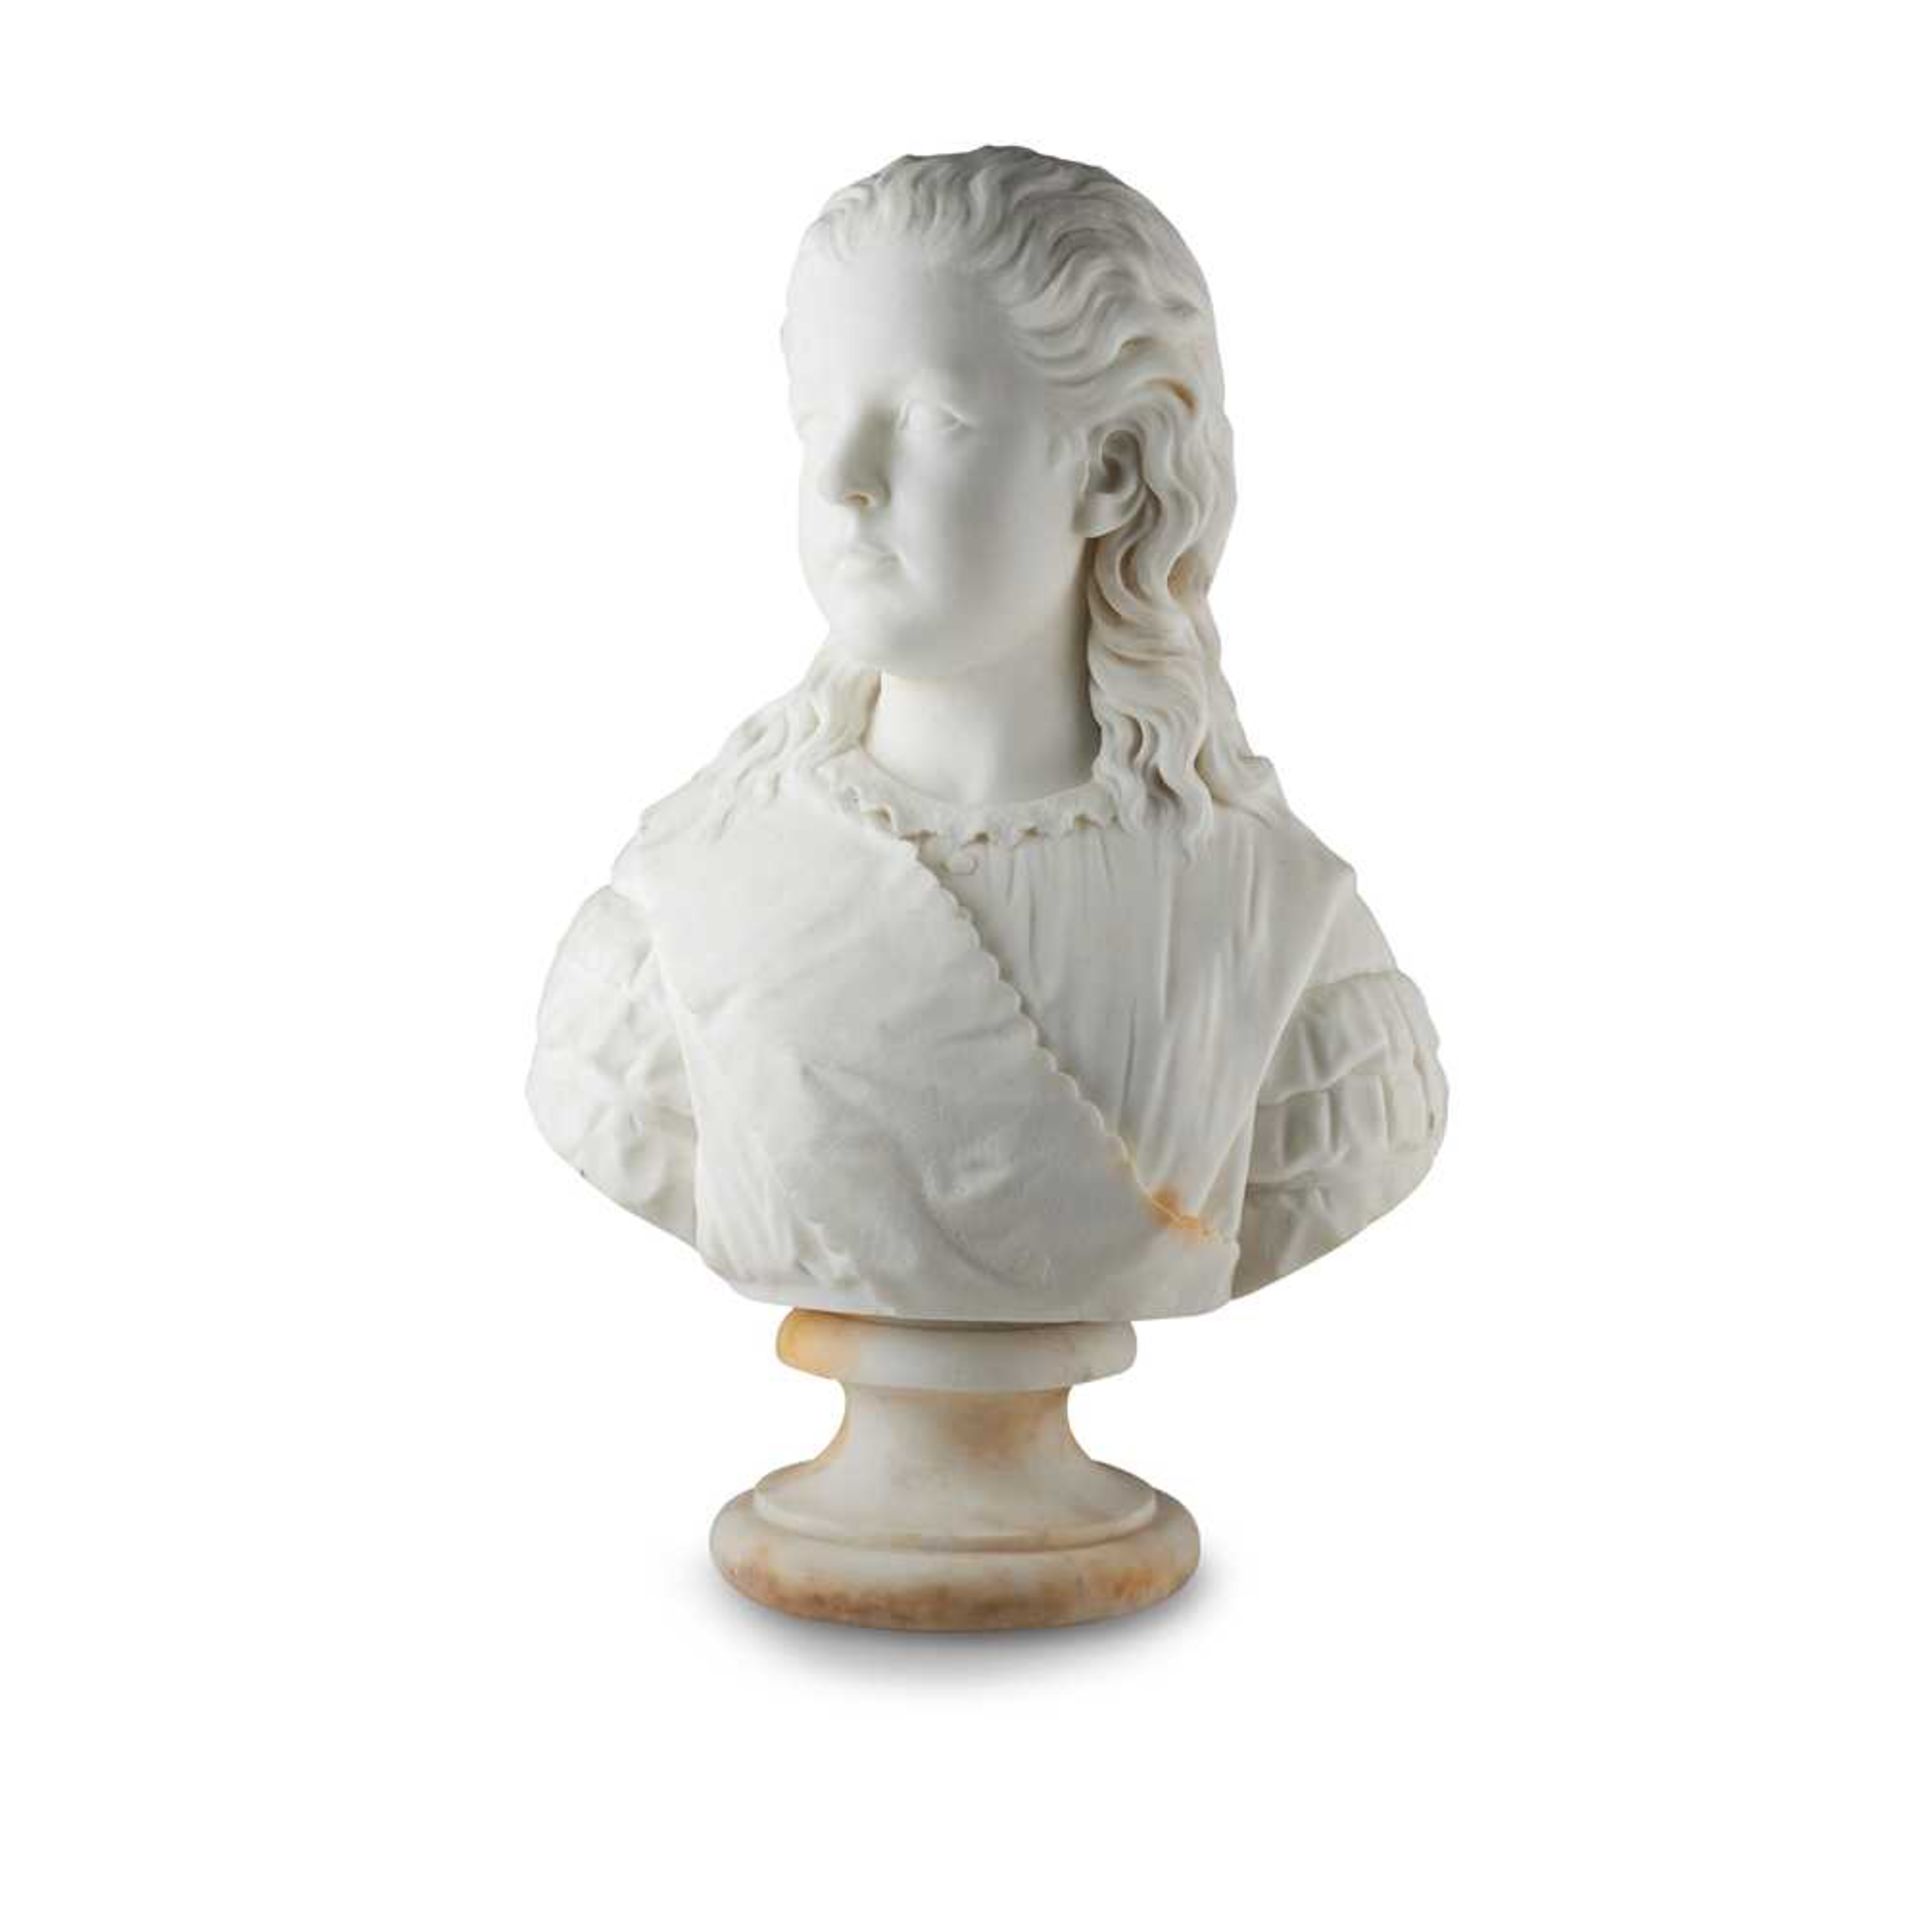 WILLIAM BRODIE, R.S.A. (1815-1881) WHITE BUST OF A GIRL, DATED 1868